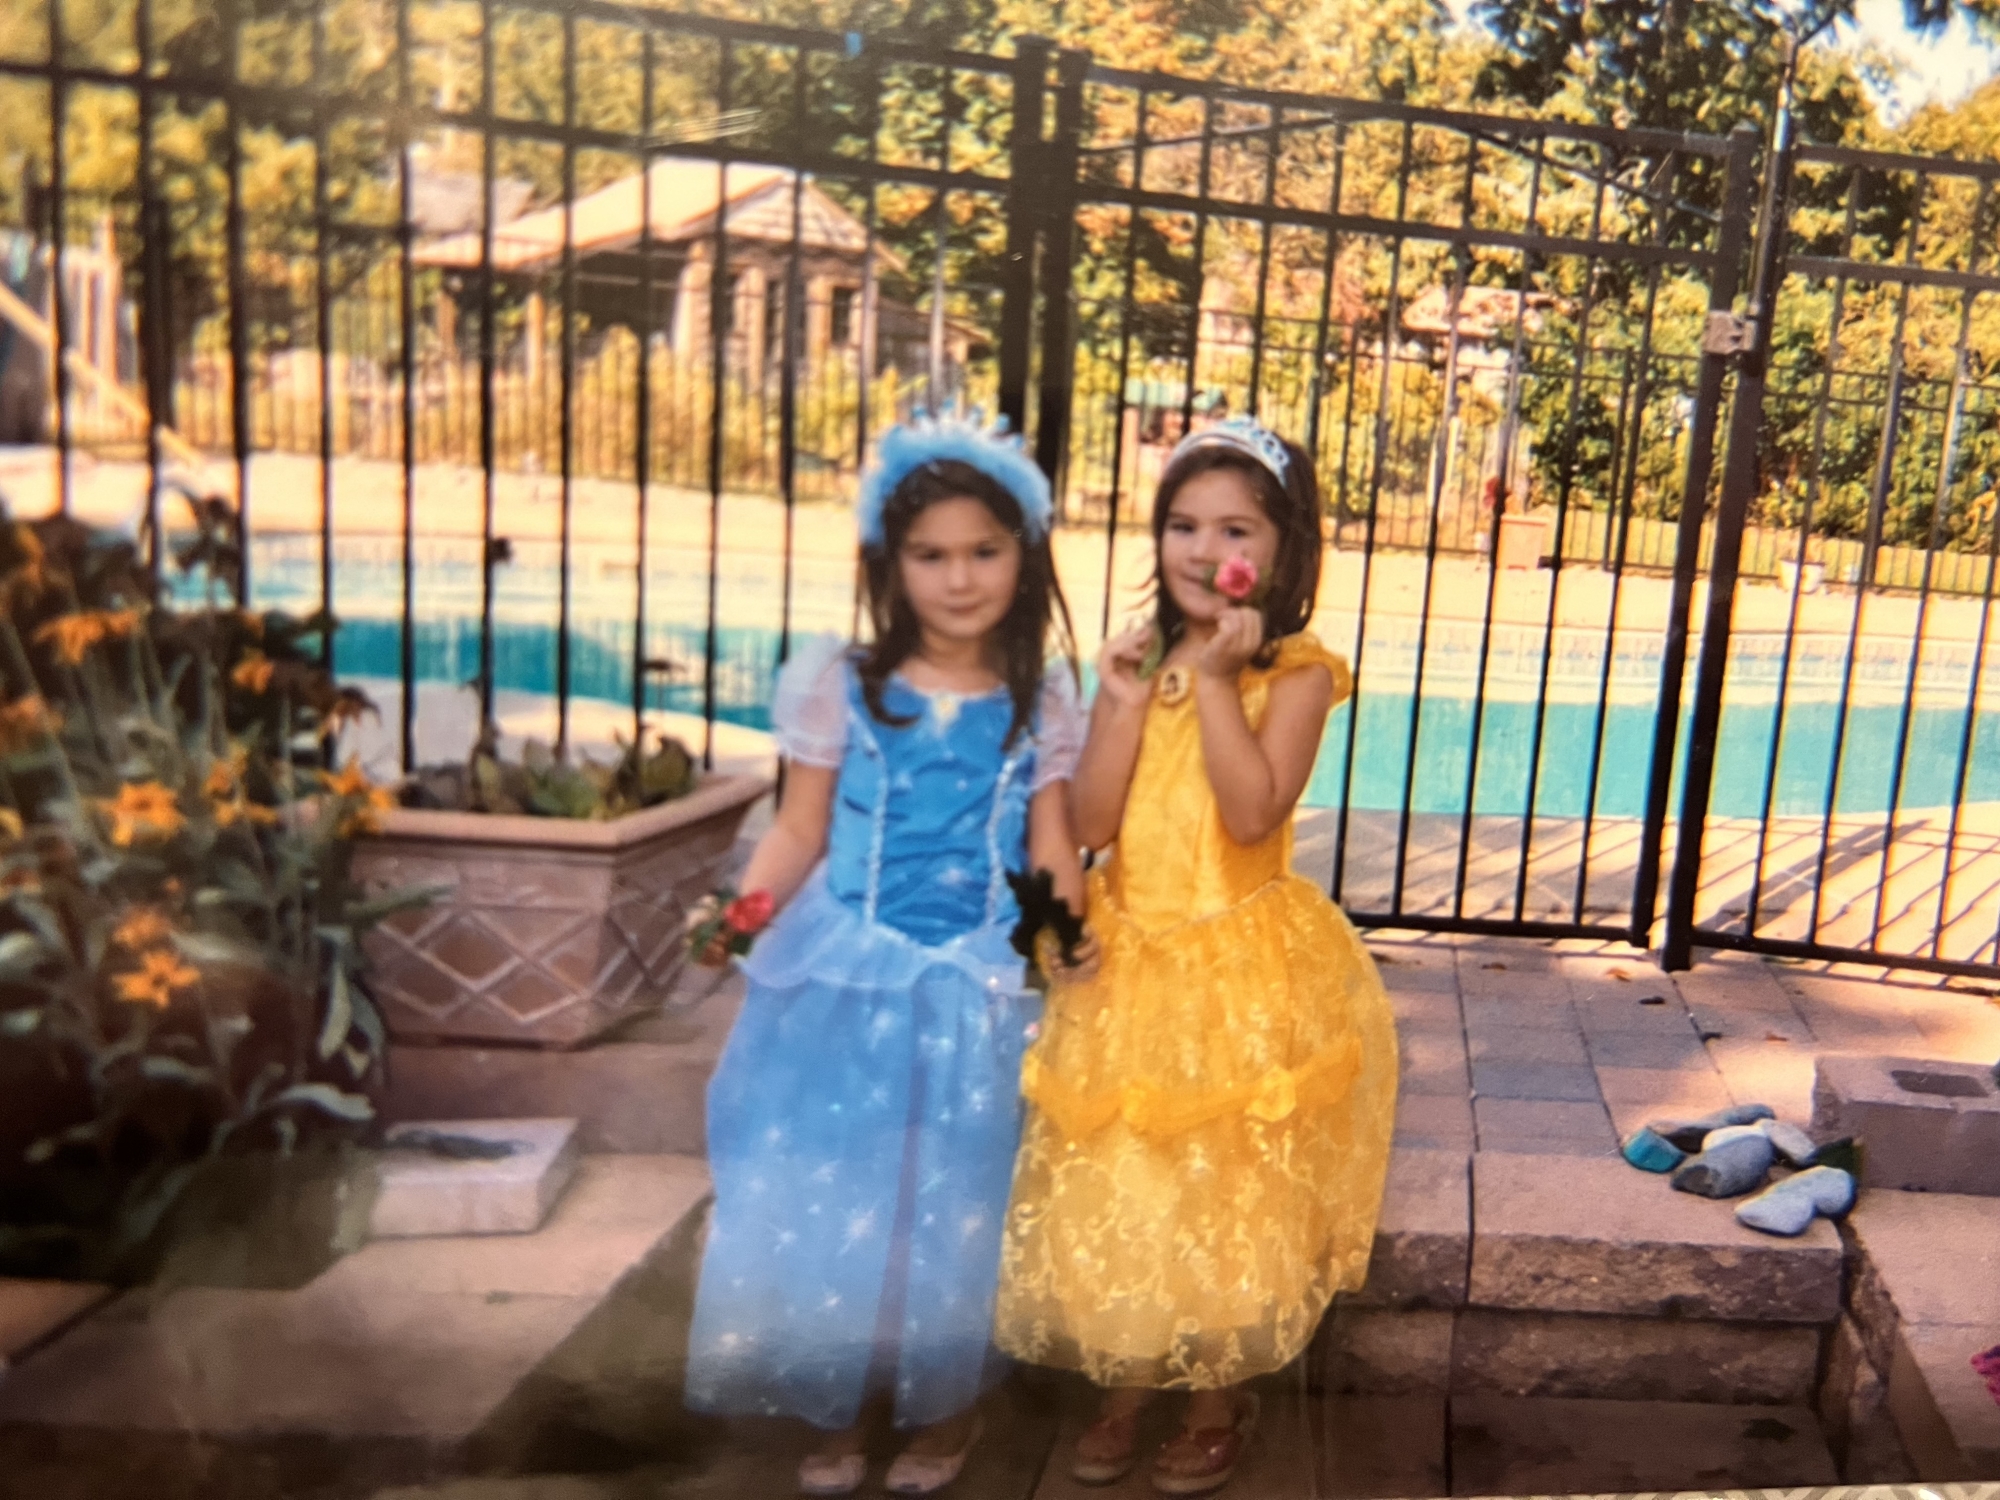 Alexa K and Tori dressed as Cinderella and Belle